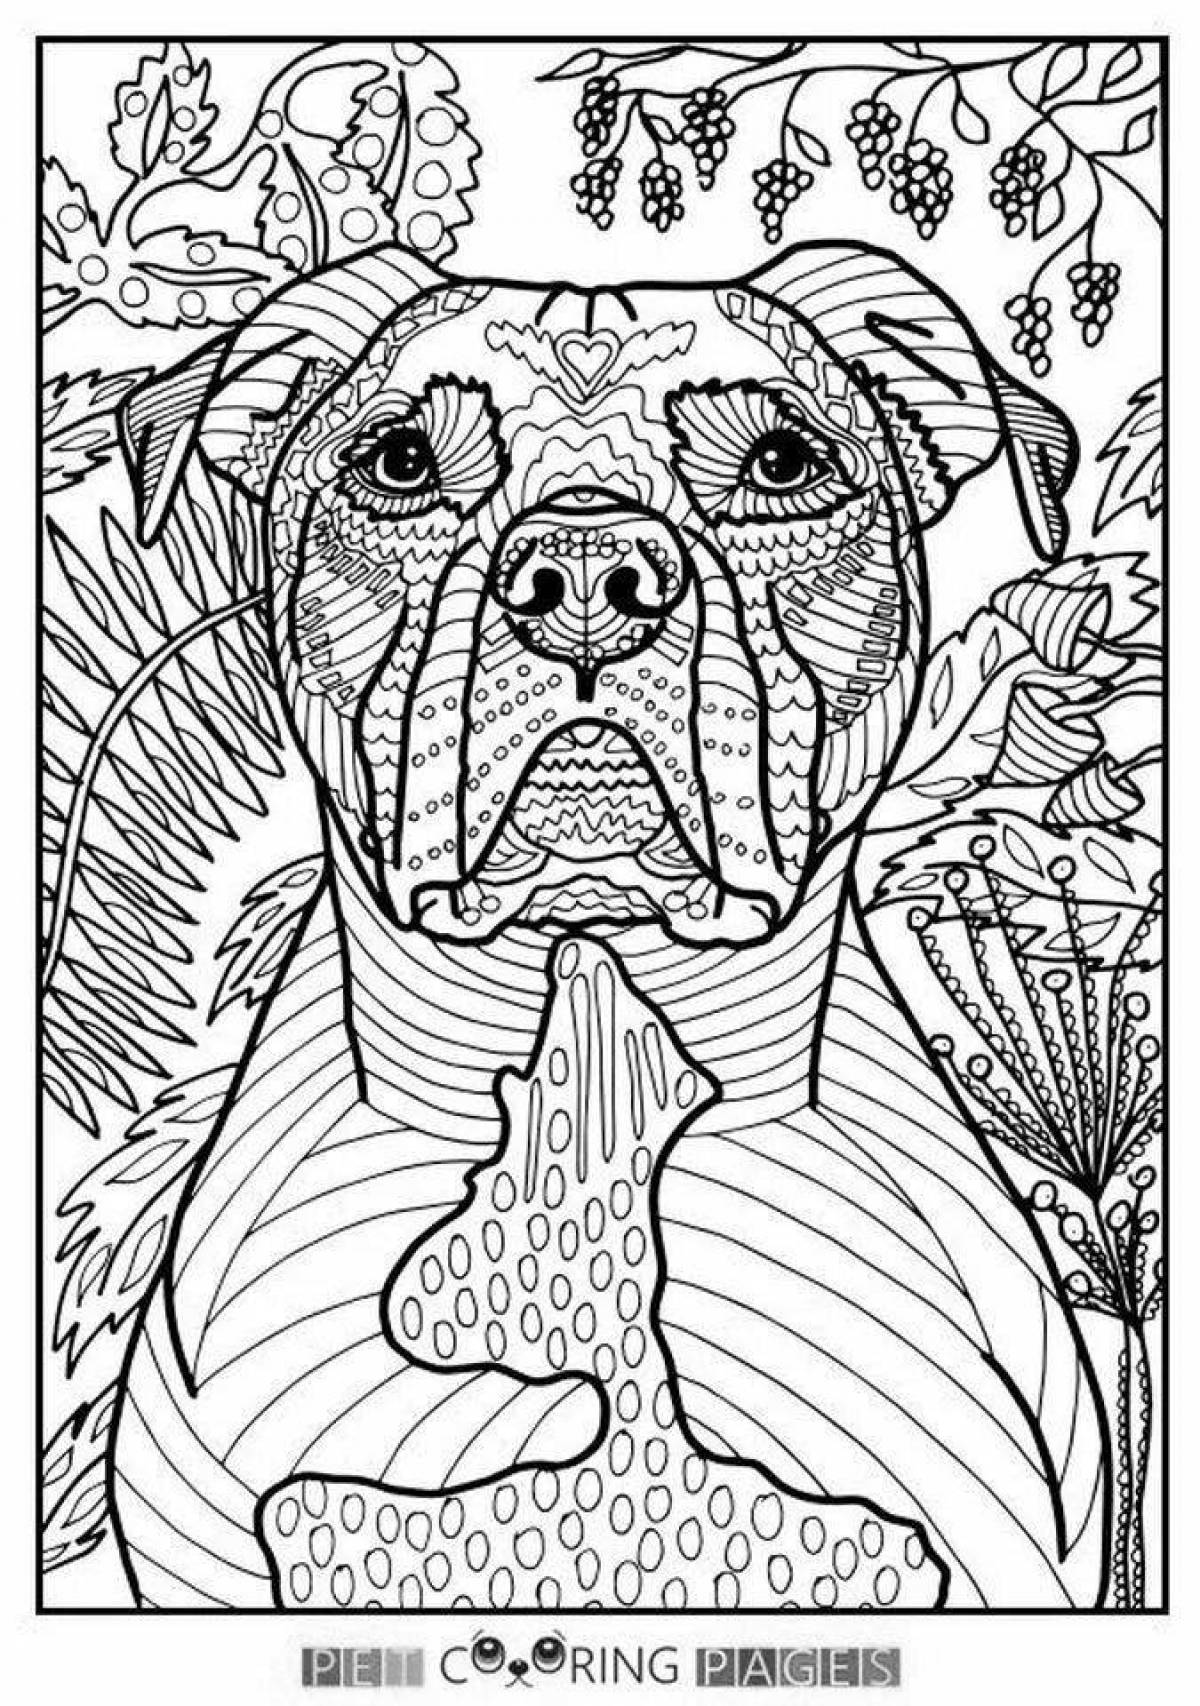 Colorful dog coloring page by number